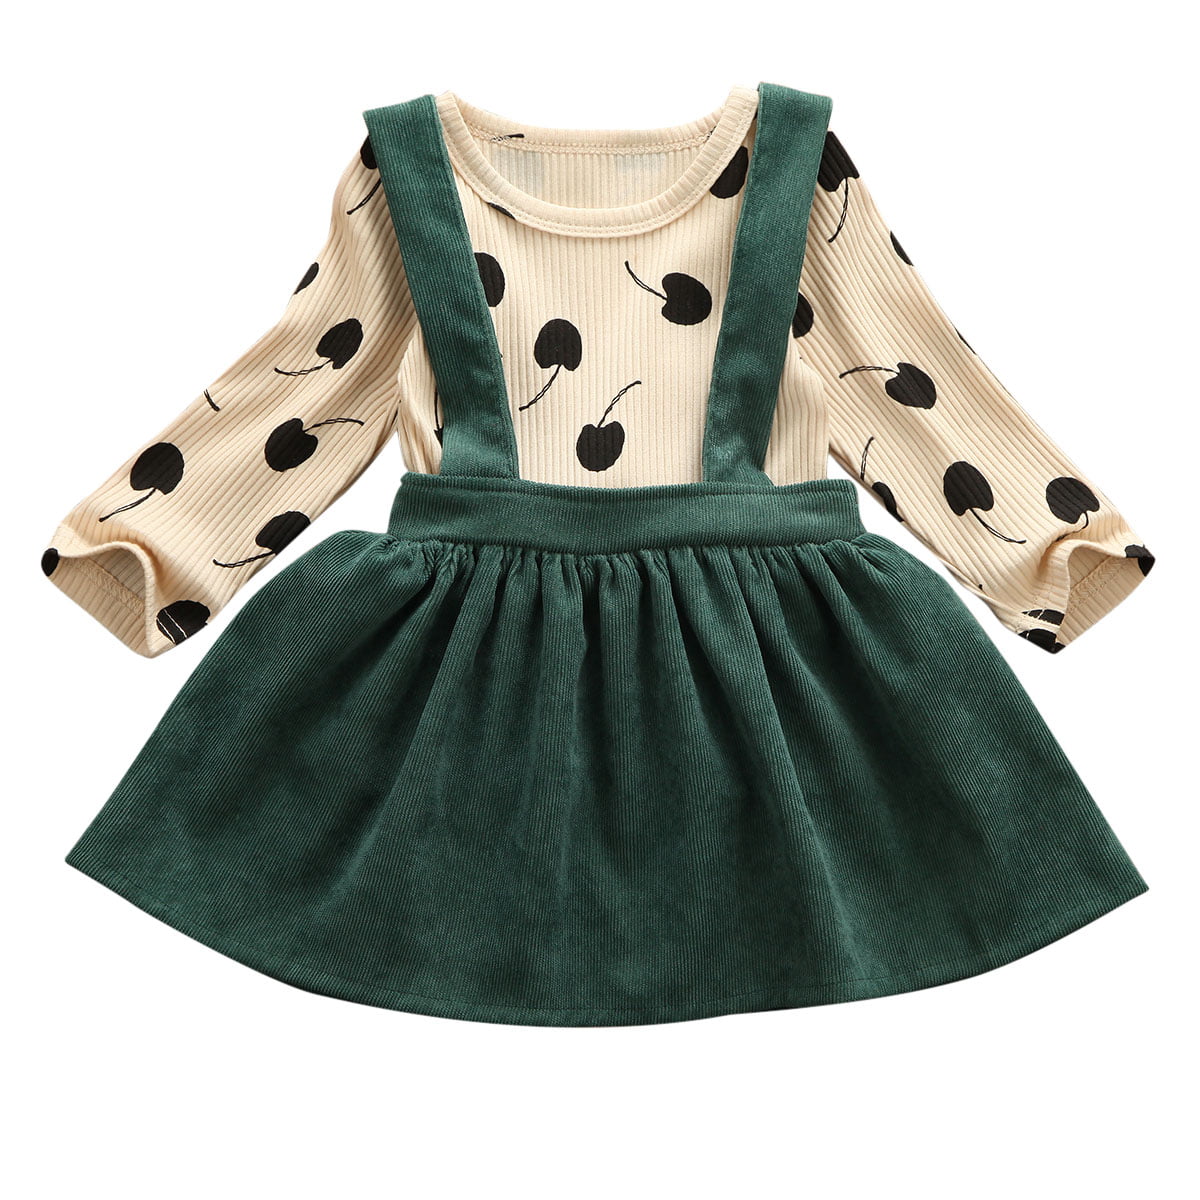 Baby Girl One-Piece Long Sleeve Princess Dress Polka Dot Printed Mini Dresses Bowknot Party Swing Dress 6-24 Months Newborn Baby Clothes Outfits